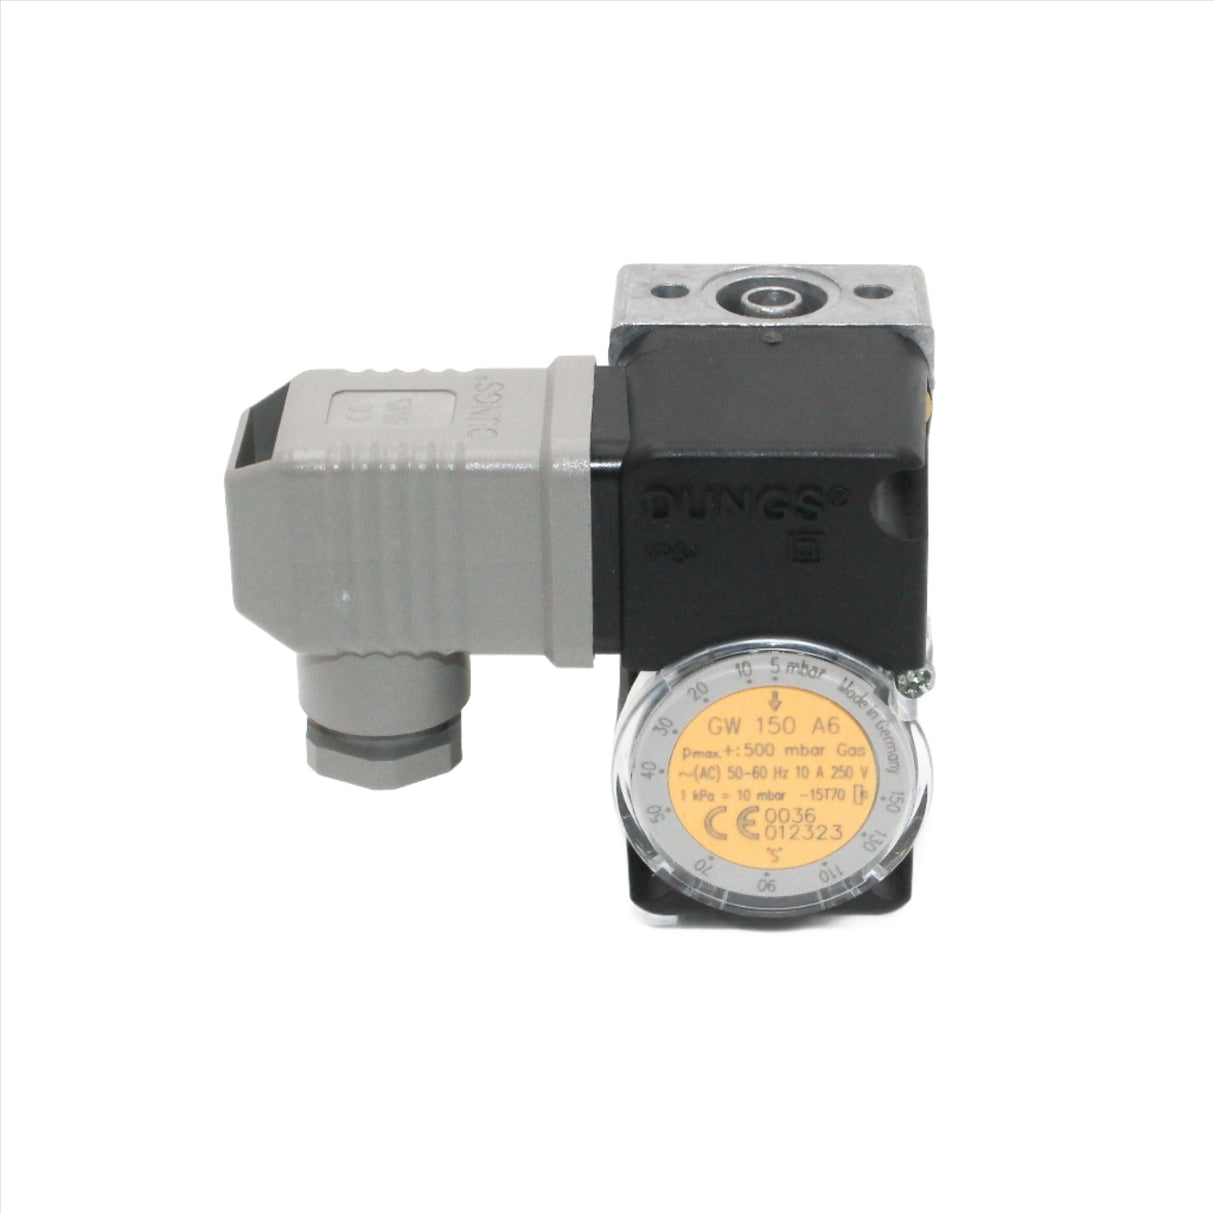 Dungs GW150 A6 5-150mbar Compact Pressure Switch